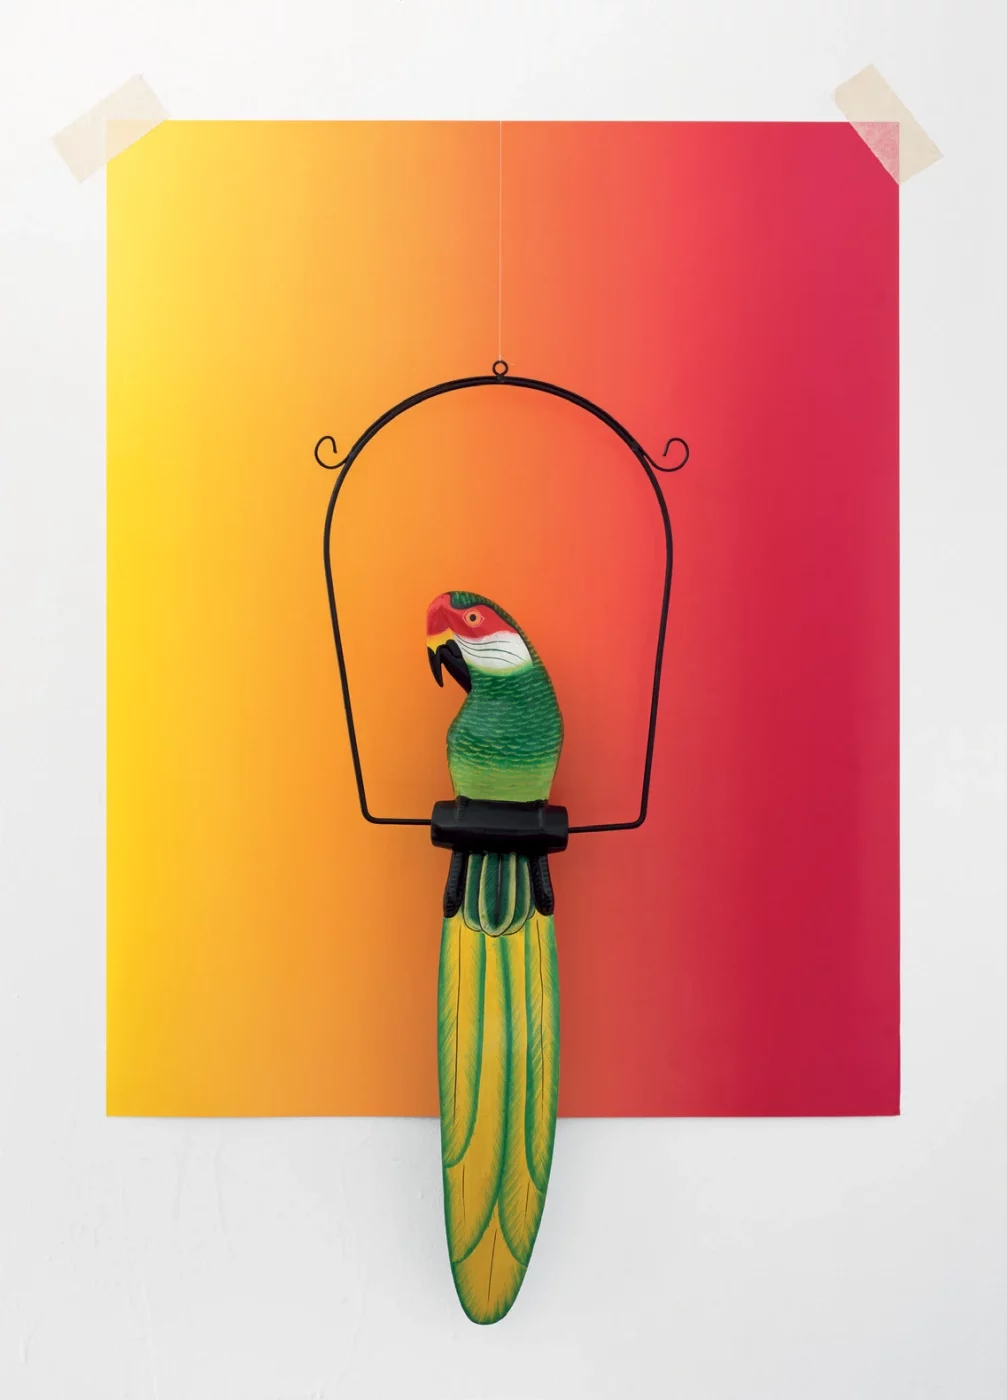 Julio Galeote. Tropical Ornament n. 3, 2015. Courtesy of the artist. @galeotex